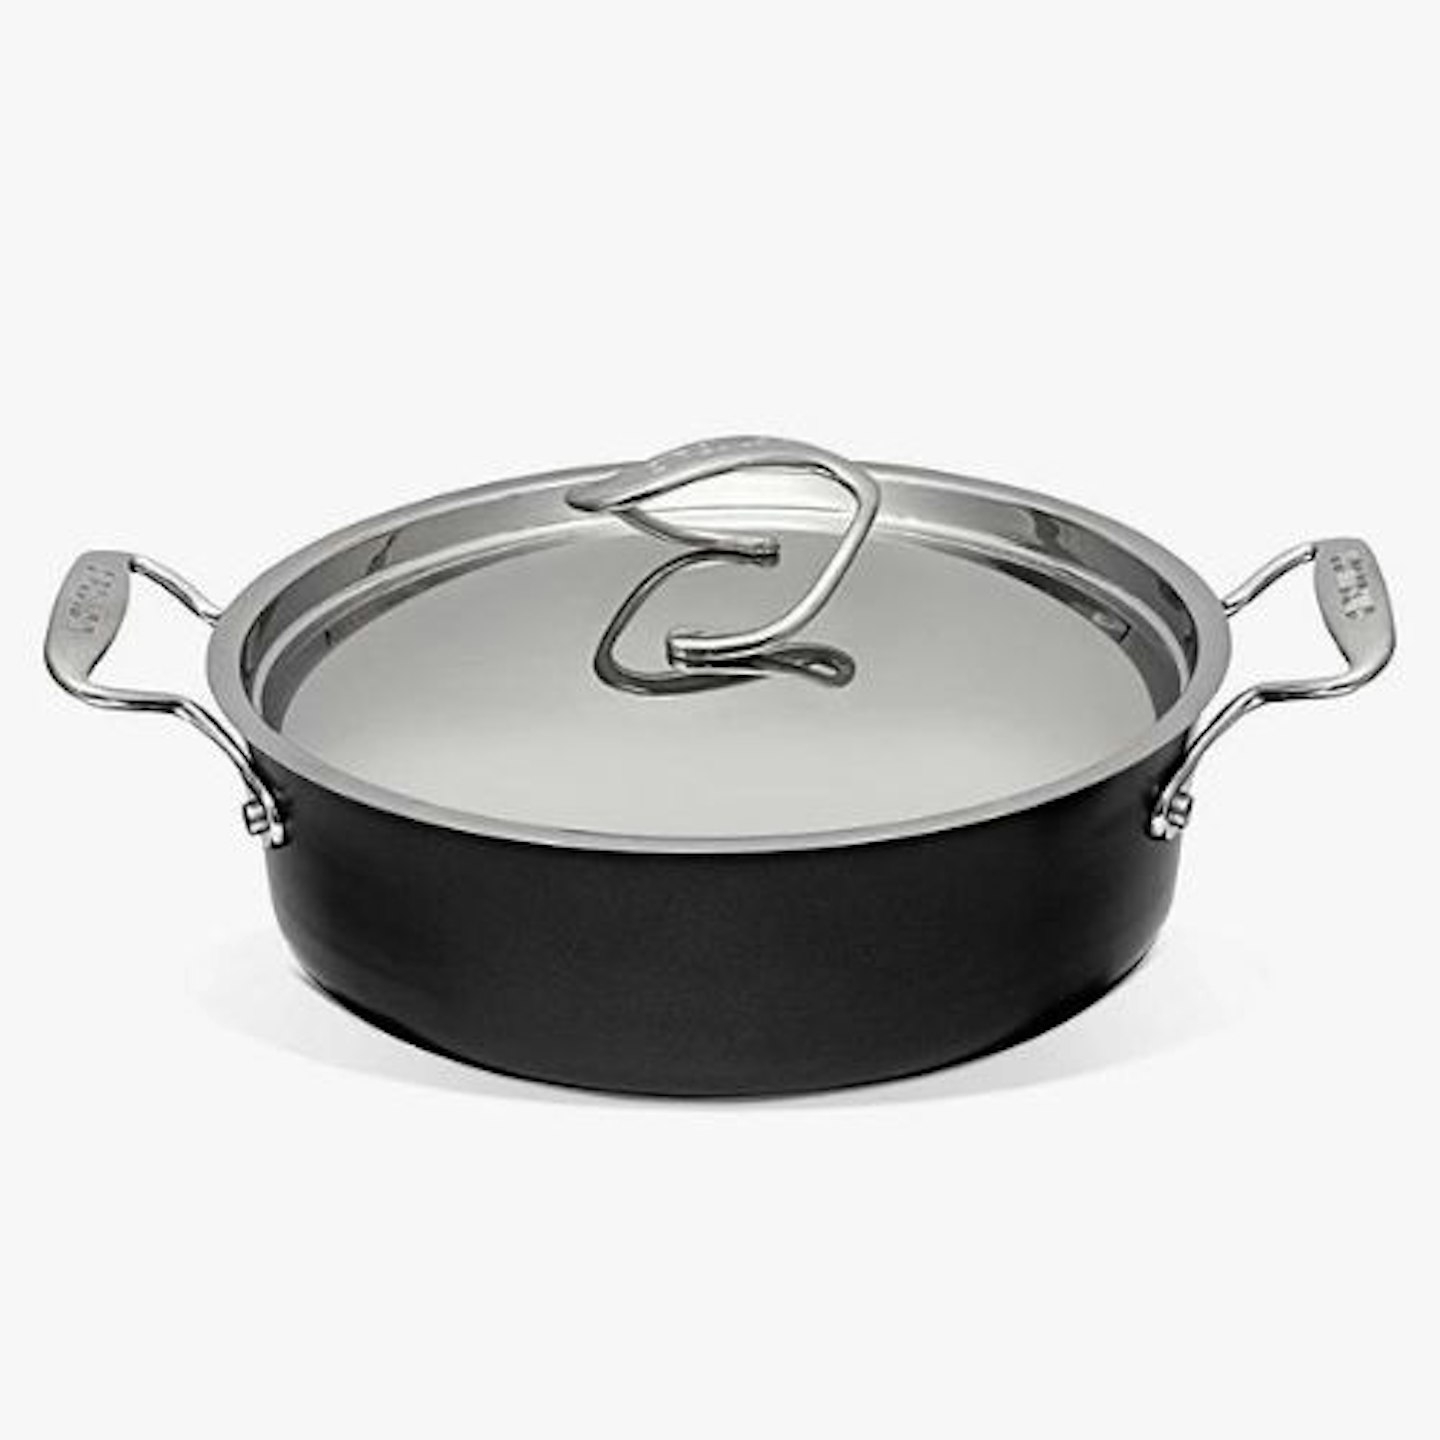 Circulon Style Hard-Anodised Non-Stick Sauteuse Pan and Lid